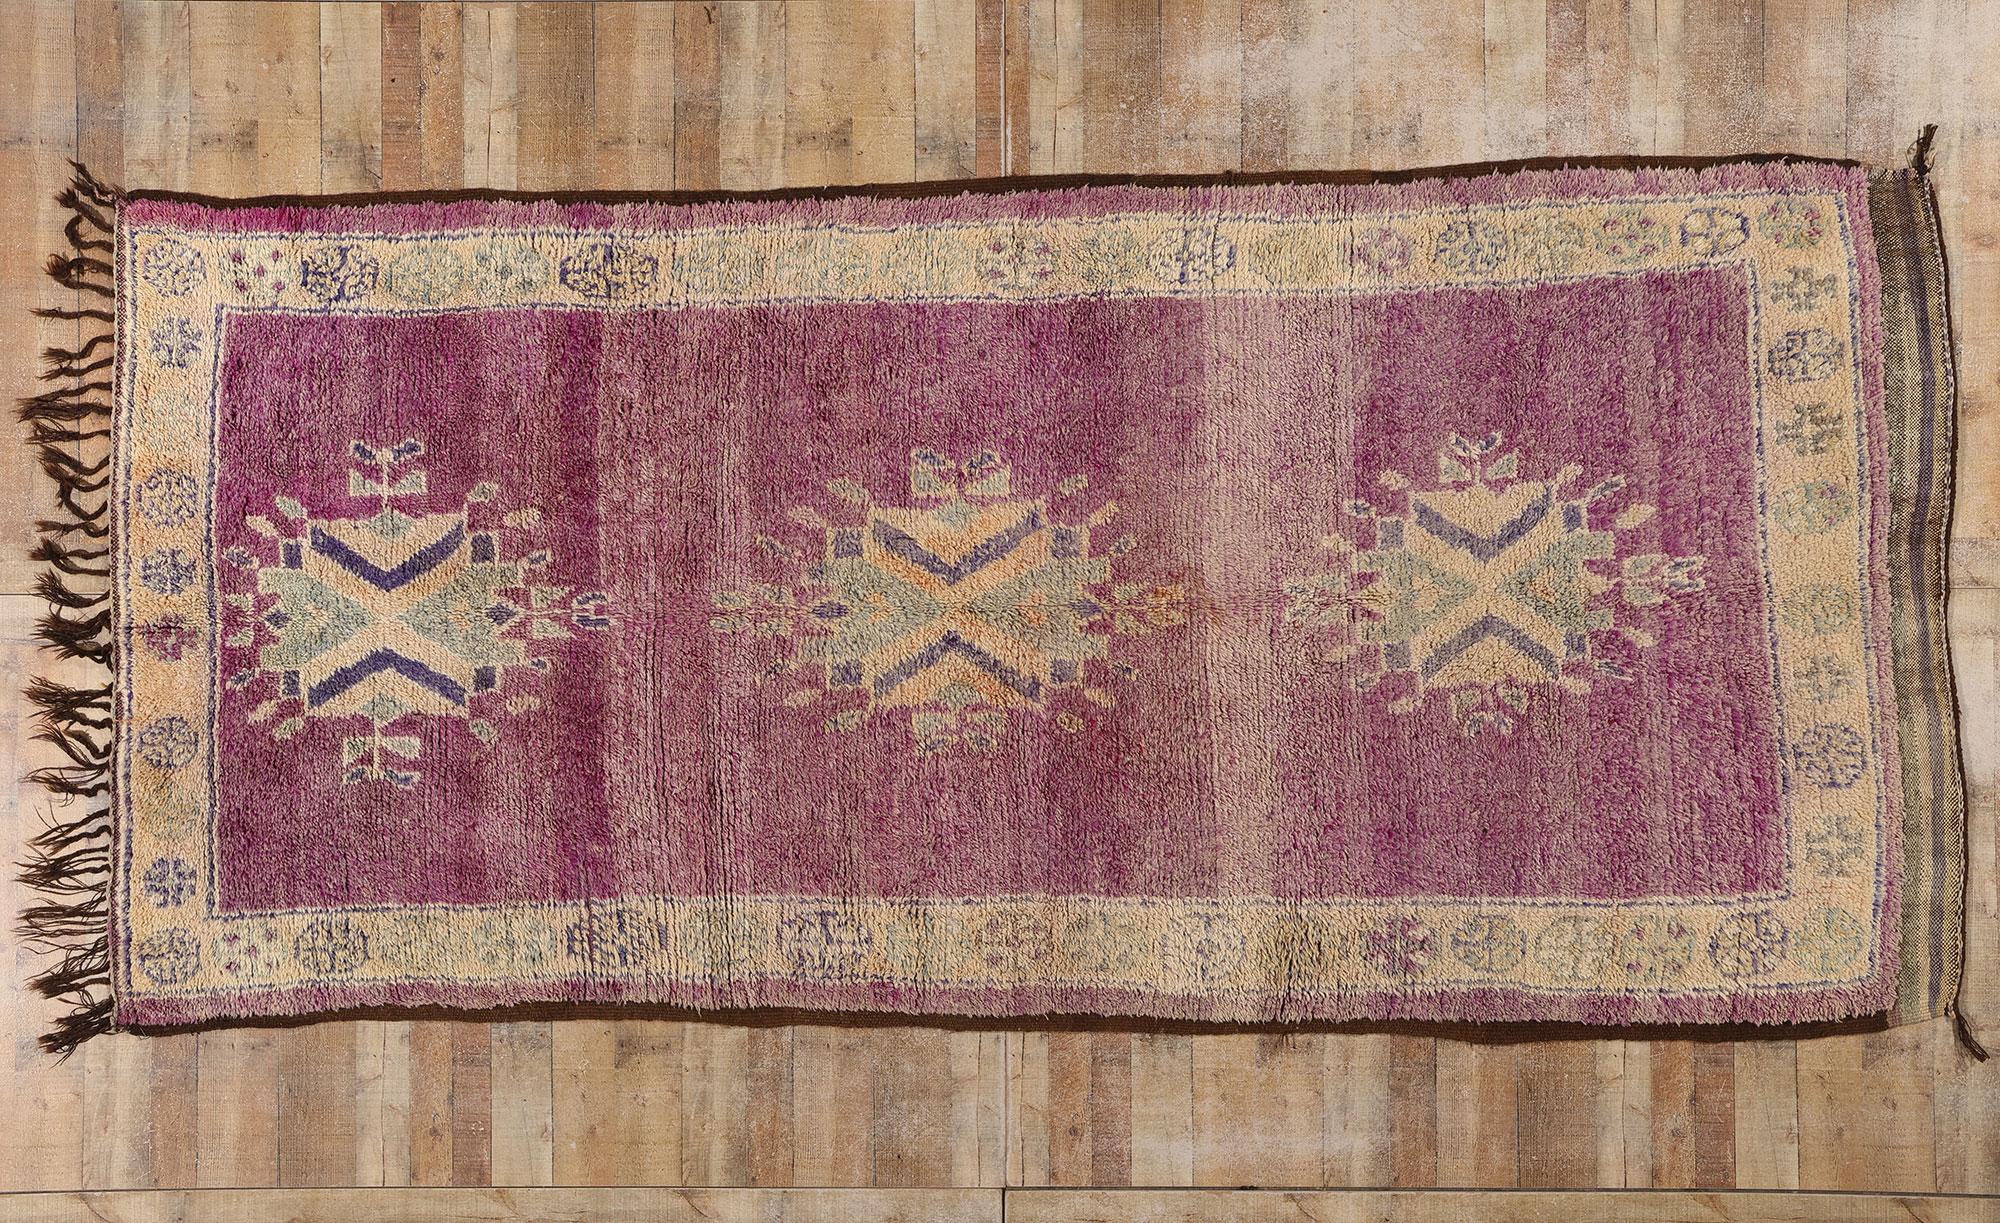 20931 Vintage Purple Talsint Moroccan Rug, 05'09 x 12'04. Experience the cozy allure of Boho Chic with this hand-knotted wool vintage Talsint Moroccan rug. Originating from the Talsint region in northeastern Morocco, this vintage Moroccan rug exudes